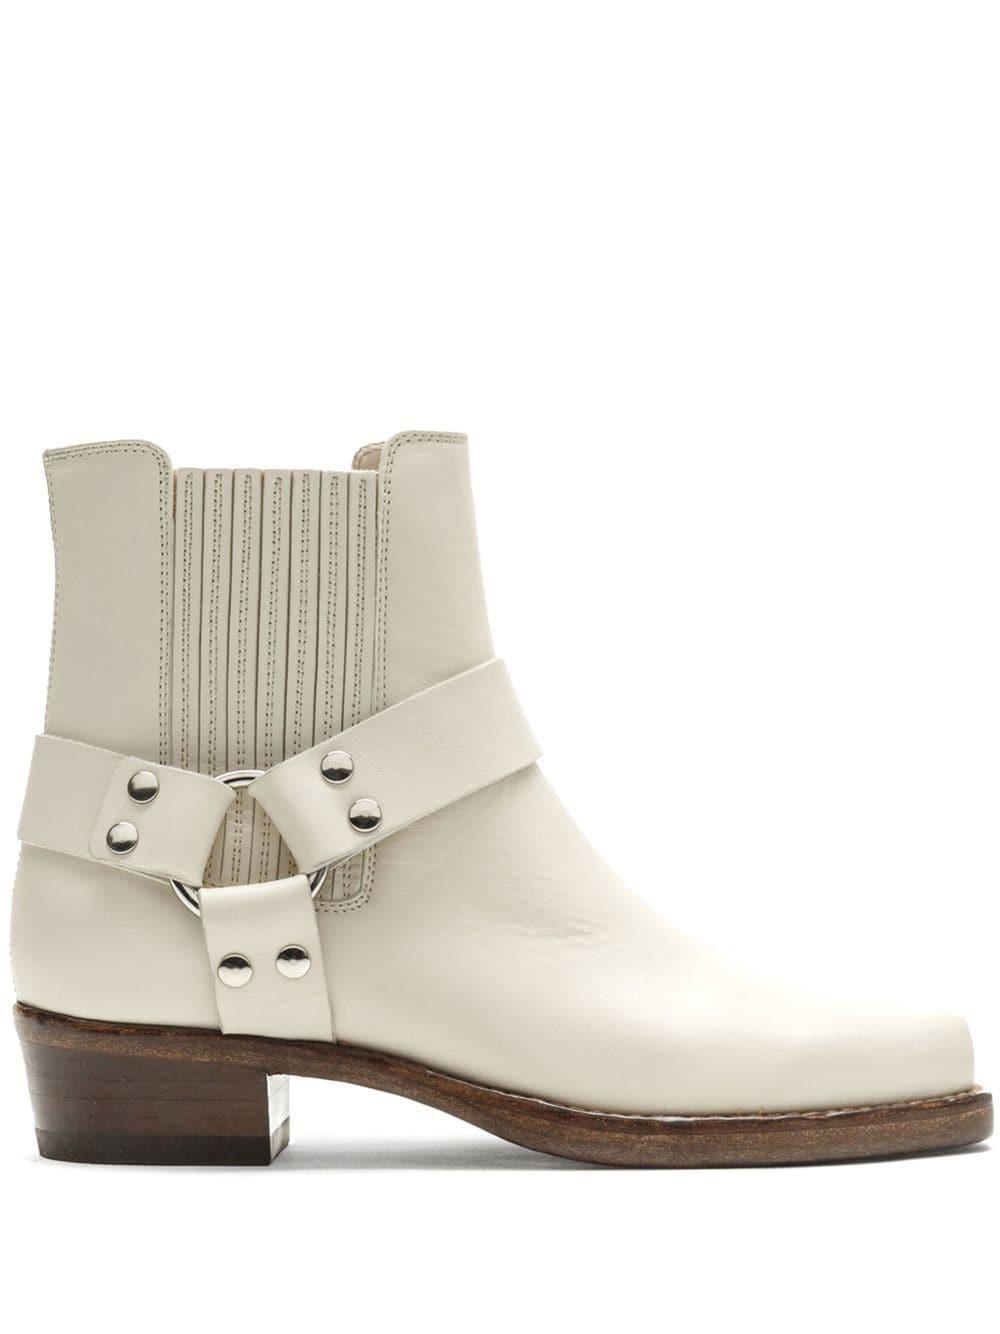 RE/DONE Almond-toe Ankle Boots in Natural | Lyst